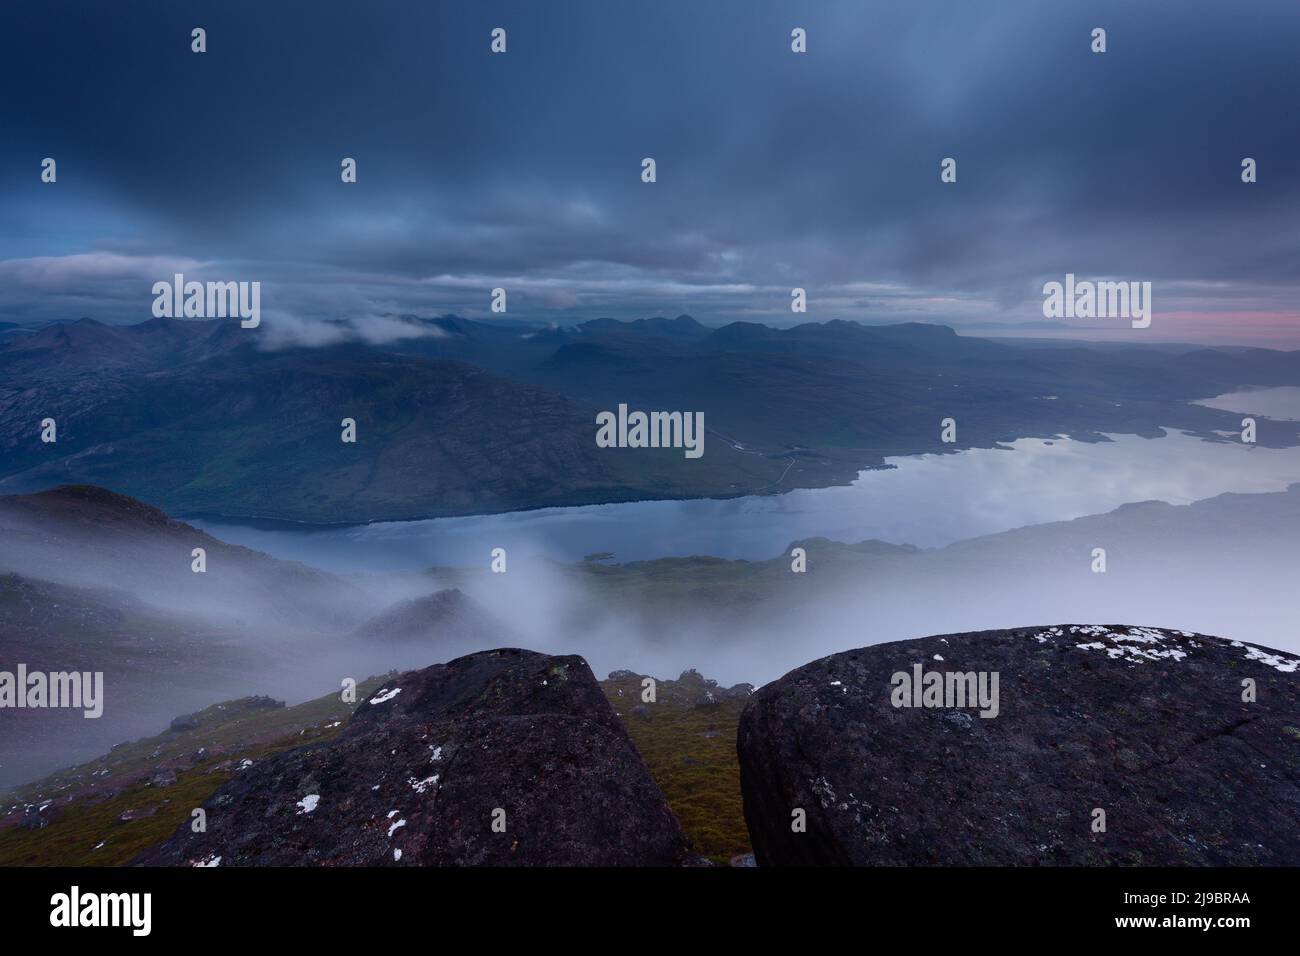 View over Loch Maree from Slioch, Torridon, at dusk. Stock Photo